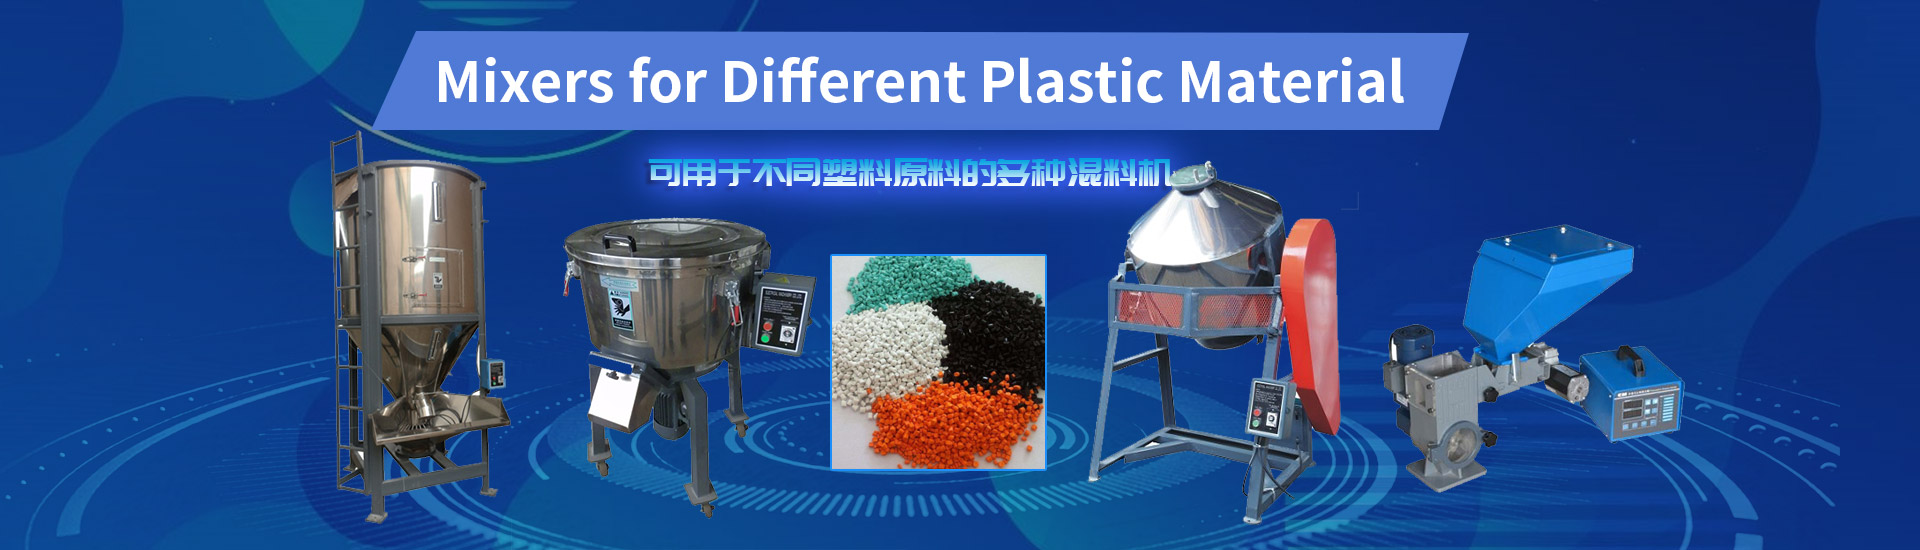 Mixers for Different Plastic Material